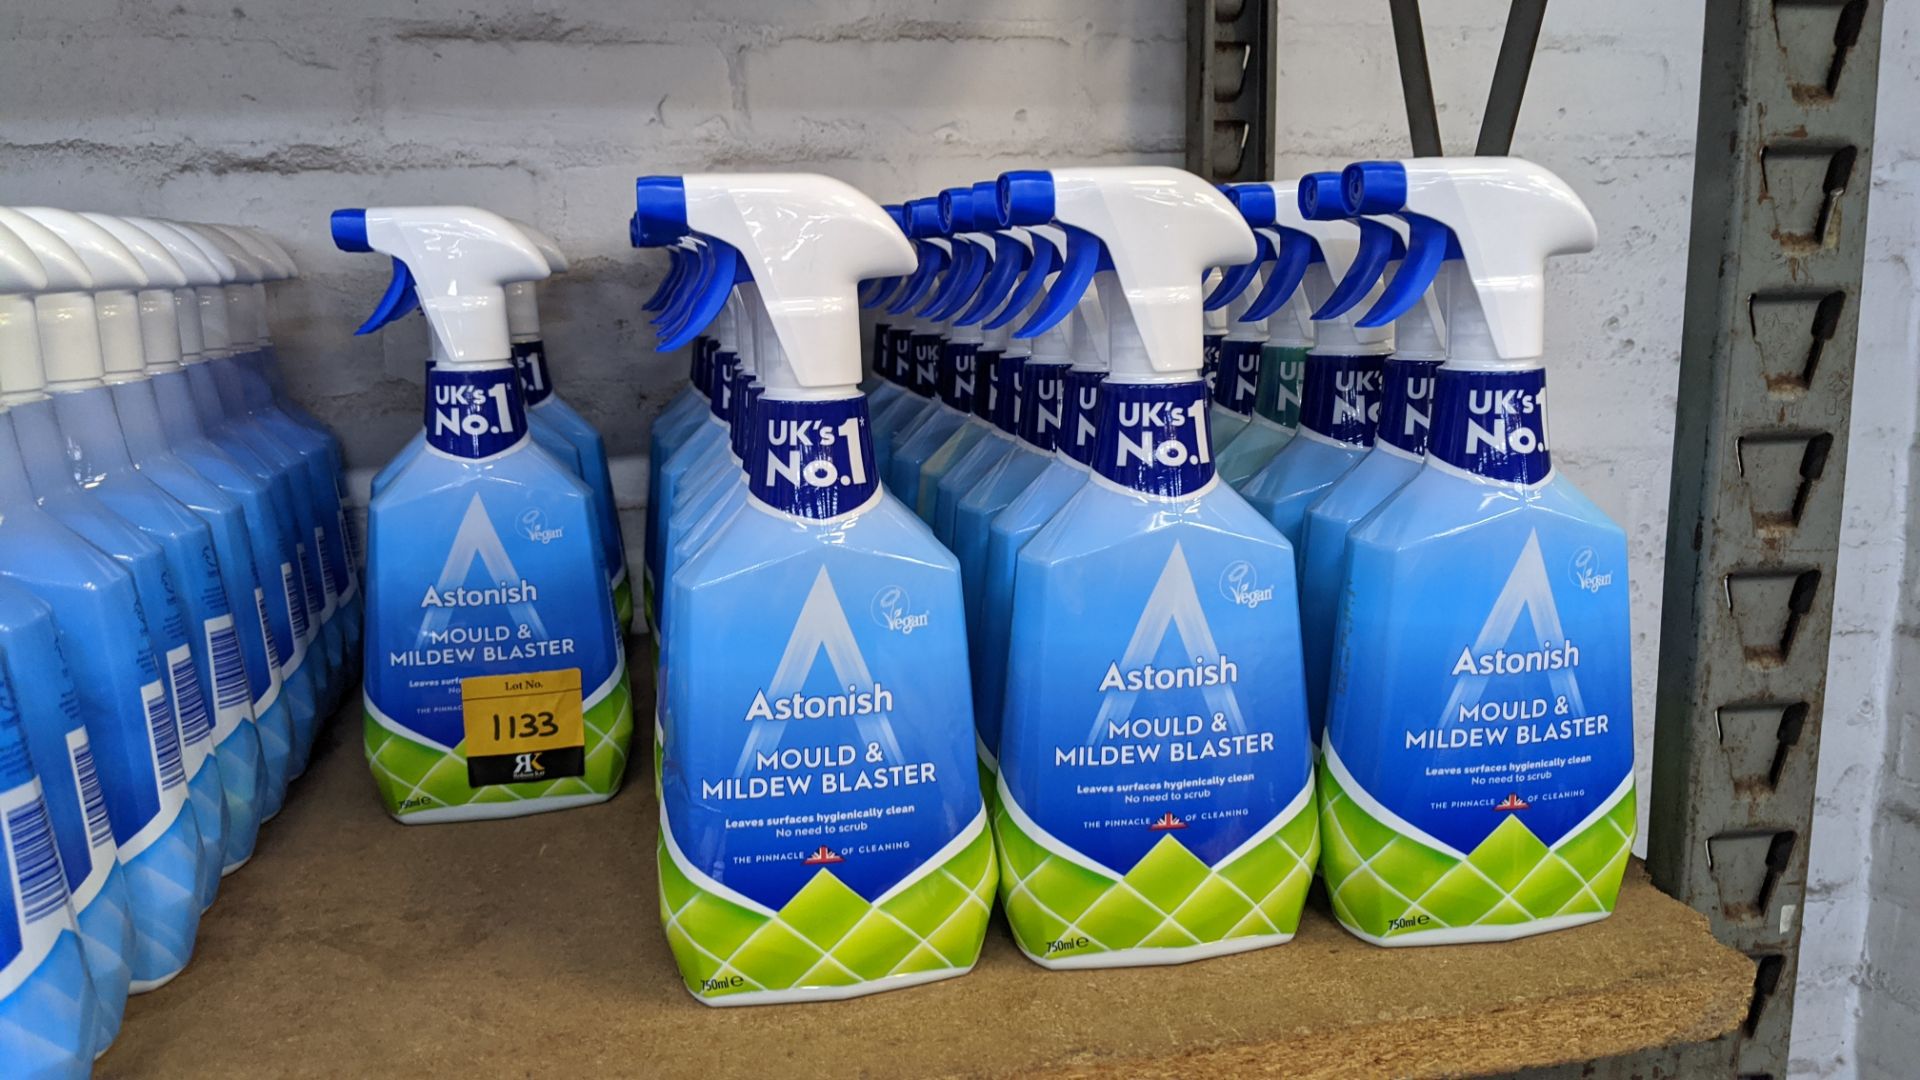 35 off 750ml bottles of Astonish Mould & Mildew Blaster. IMPORTANT – DO NOT BID BEFORE READING THE